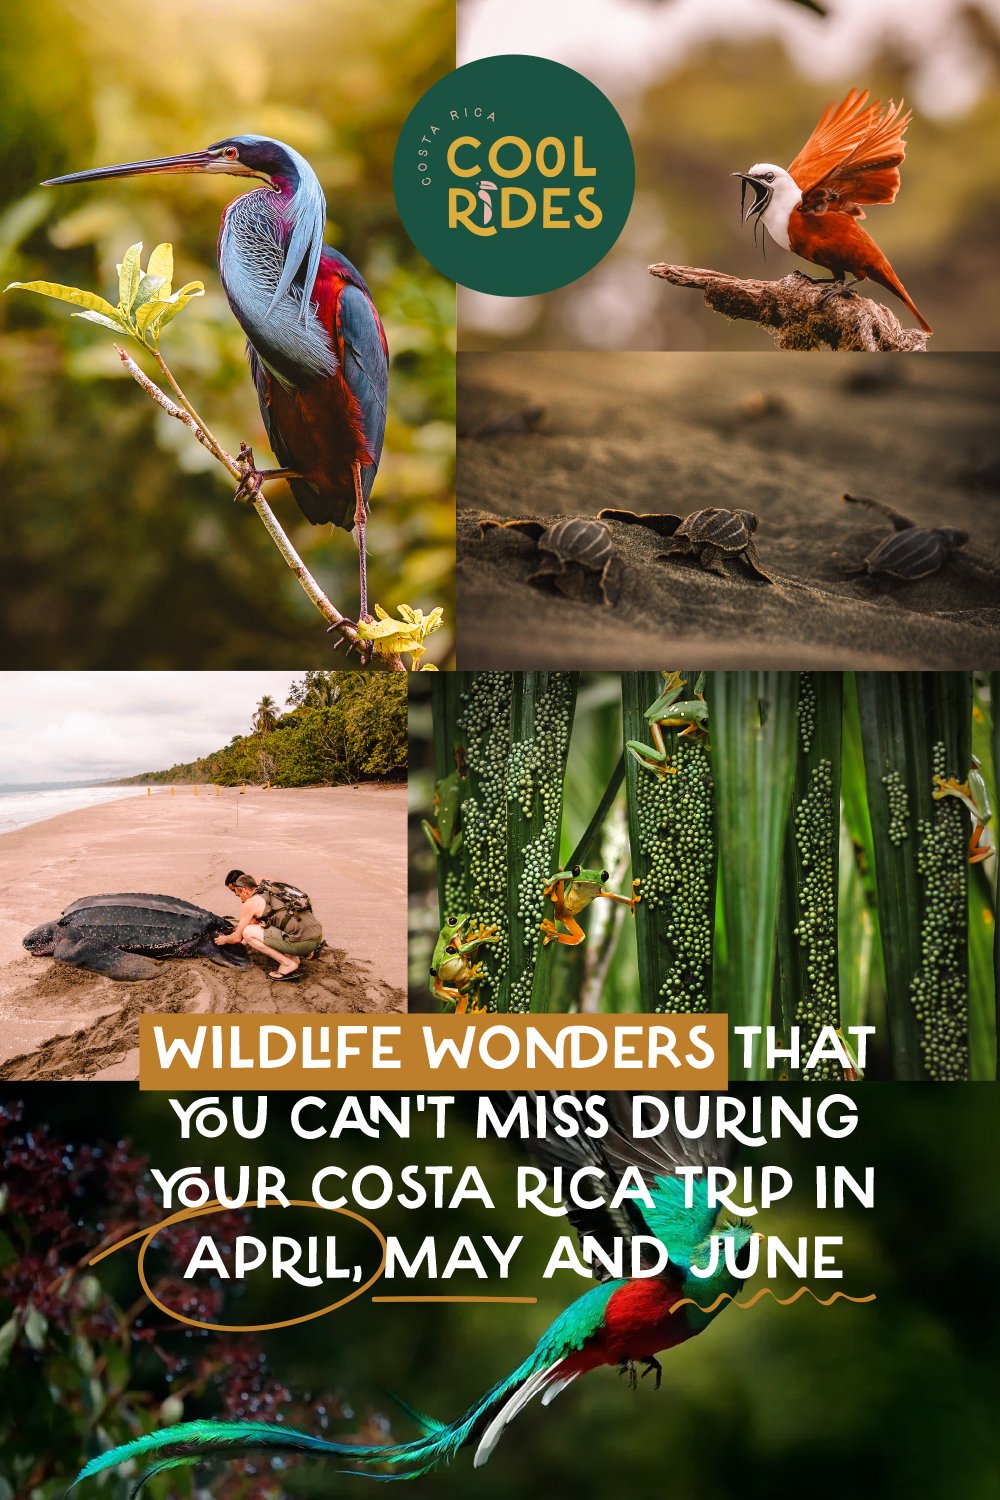 https://www.costaricacoolrides.com/tips-on-planning-a-trip-to-costa-rica/april-may-june